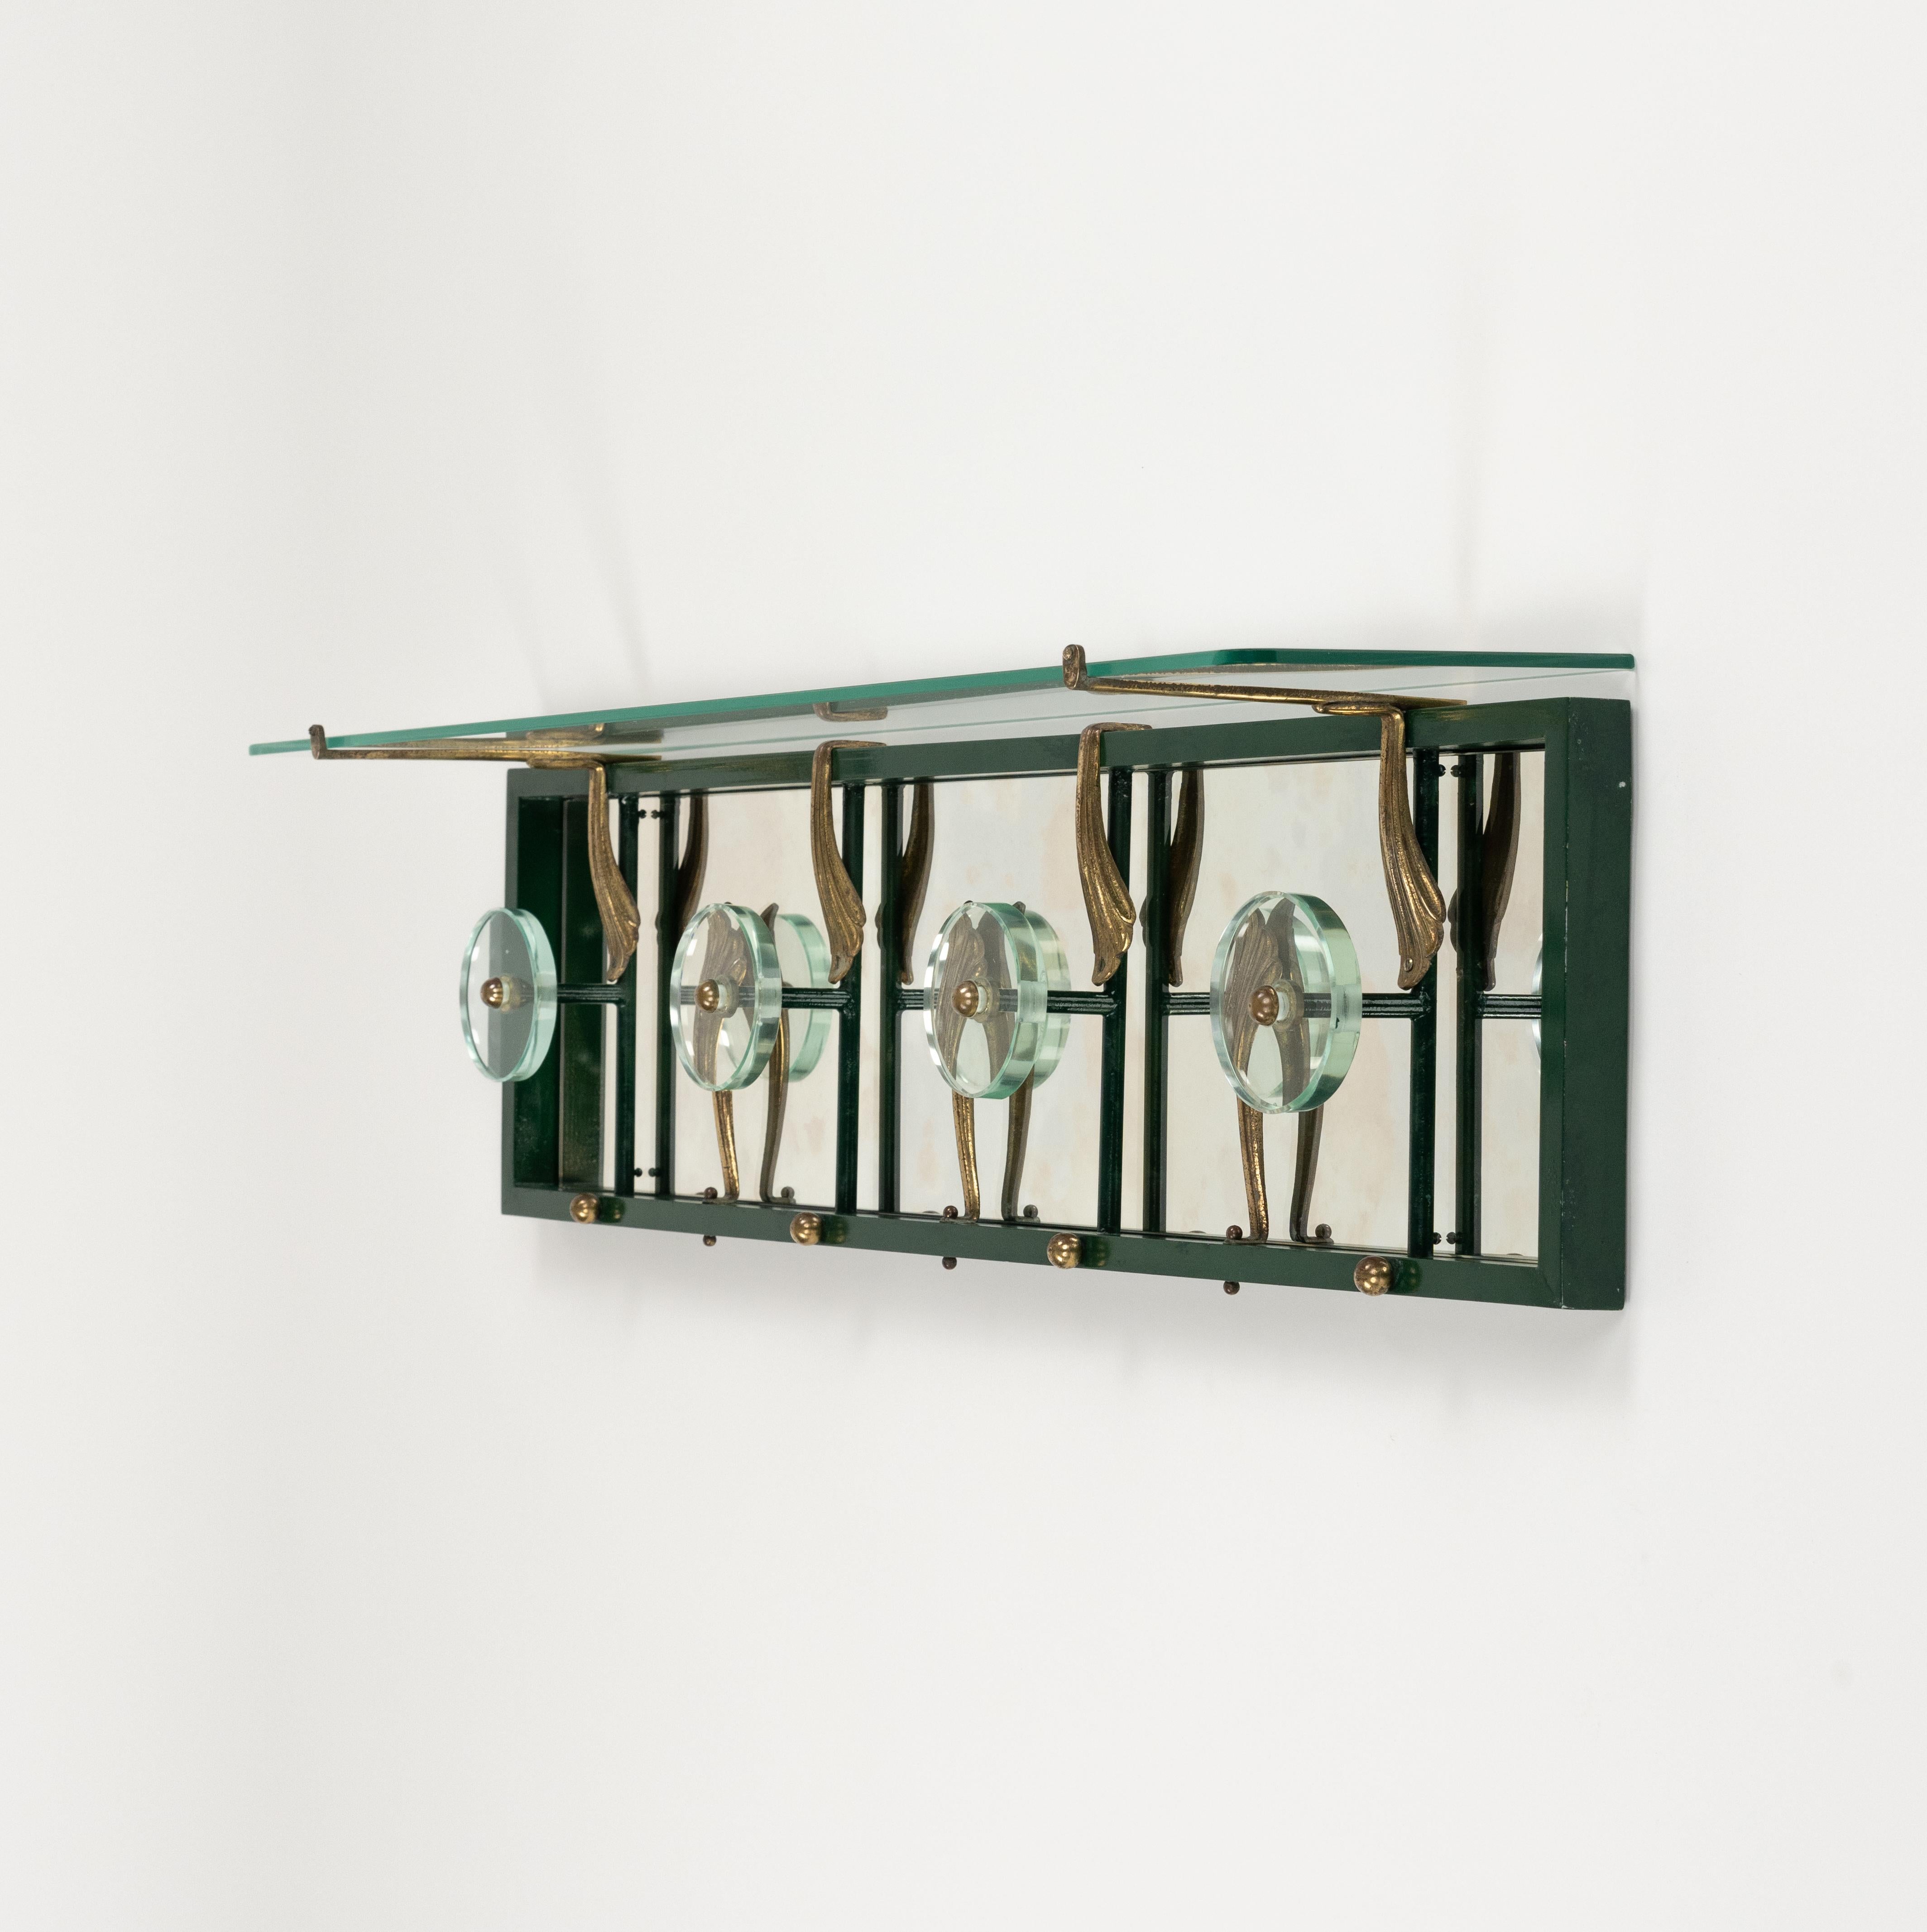 Midcentury Coat Rack Shelf in Mirror, Brass & Glass by Cristal Art, Italy, 1950s For Sale 5